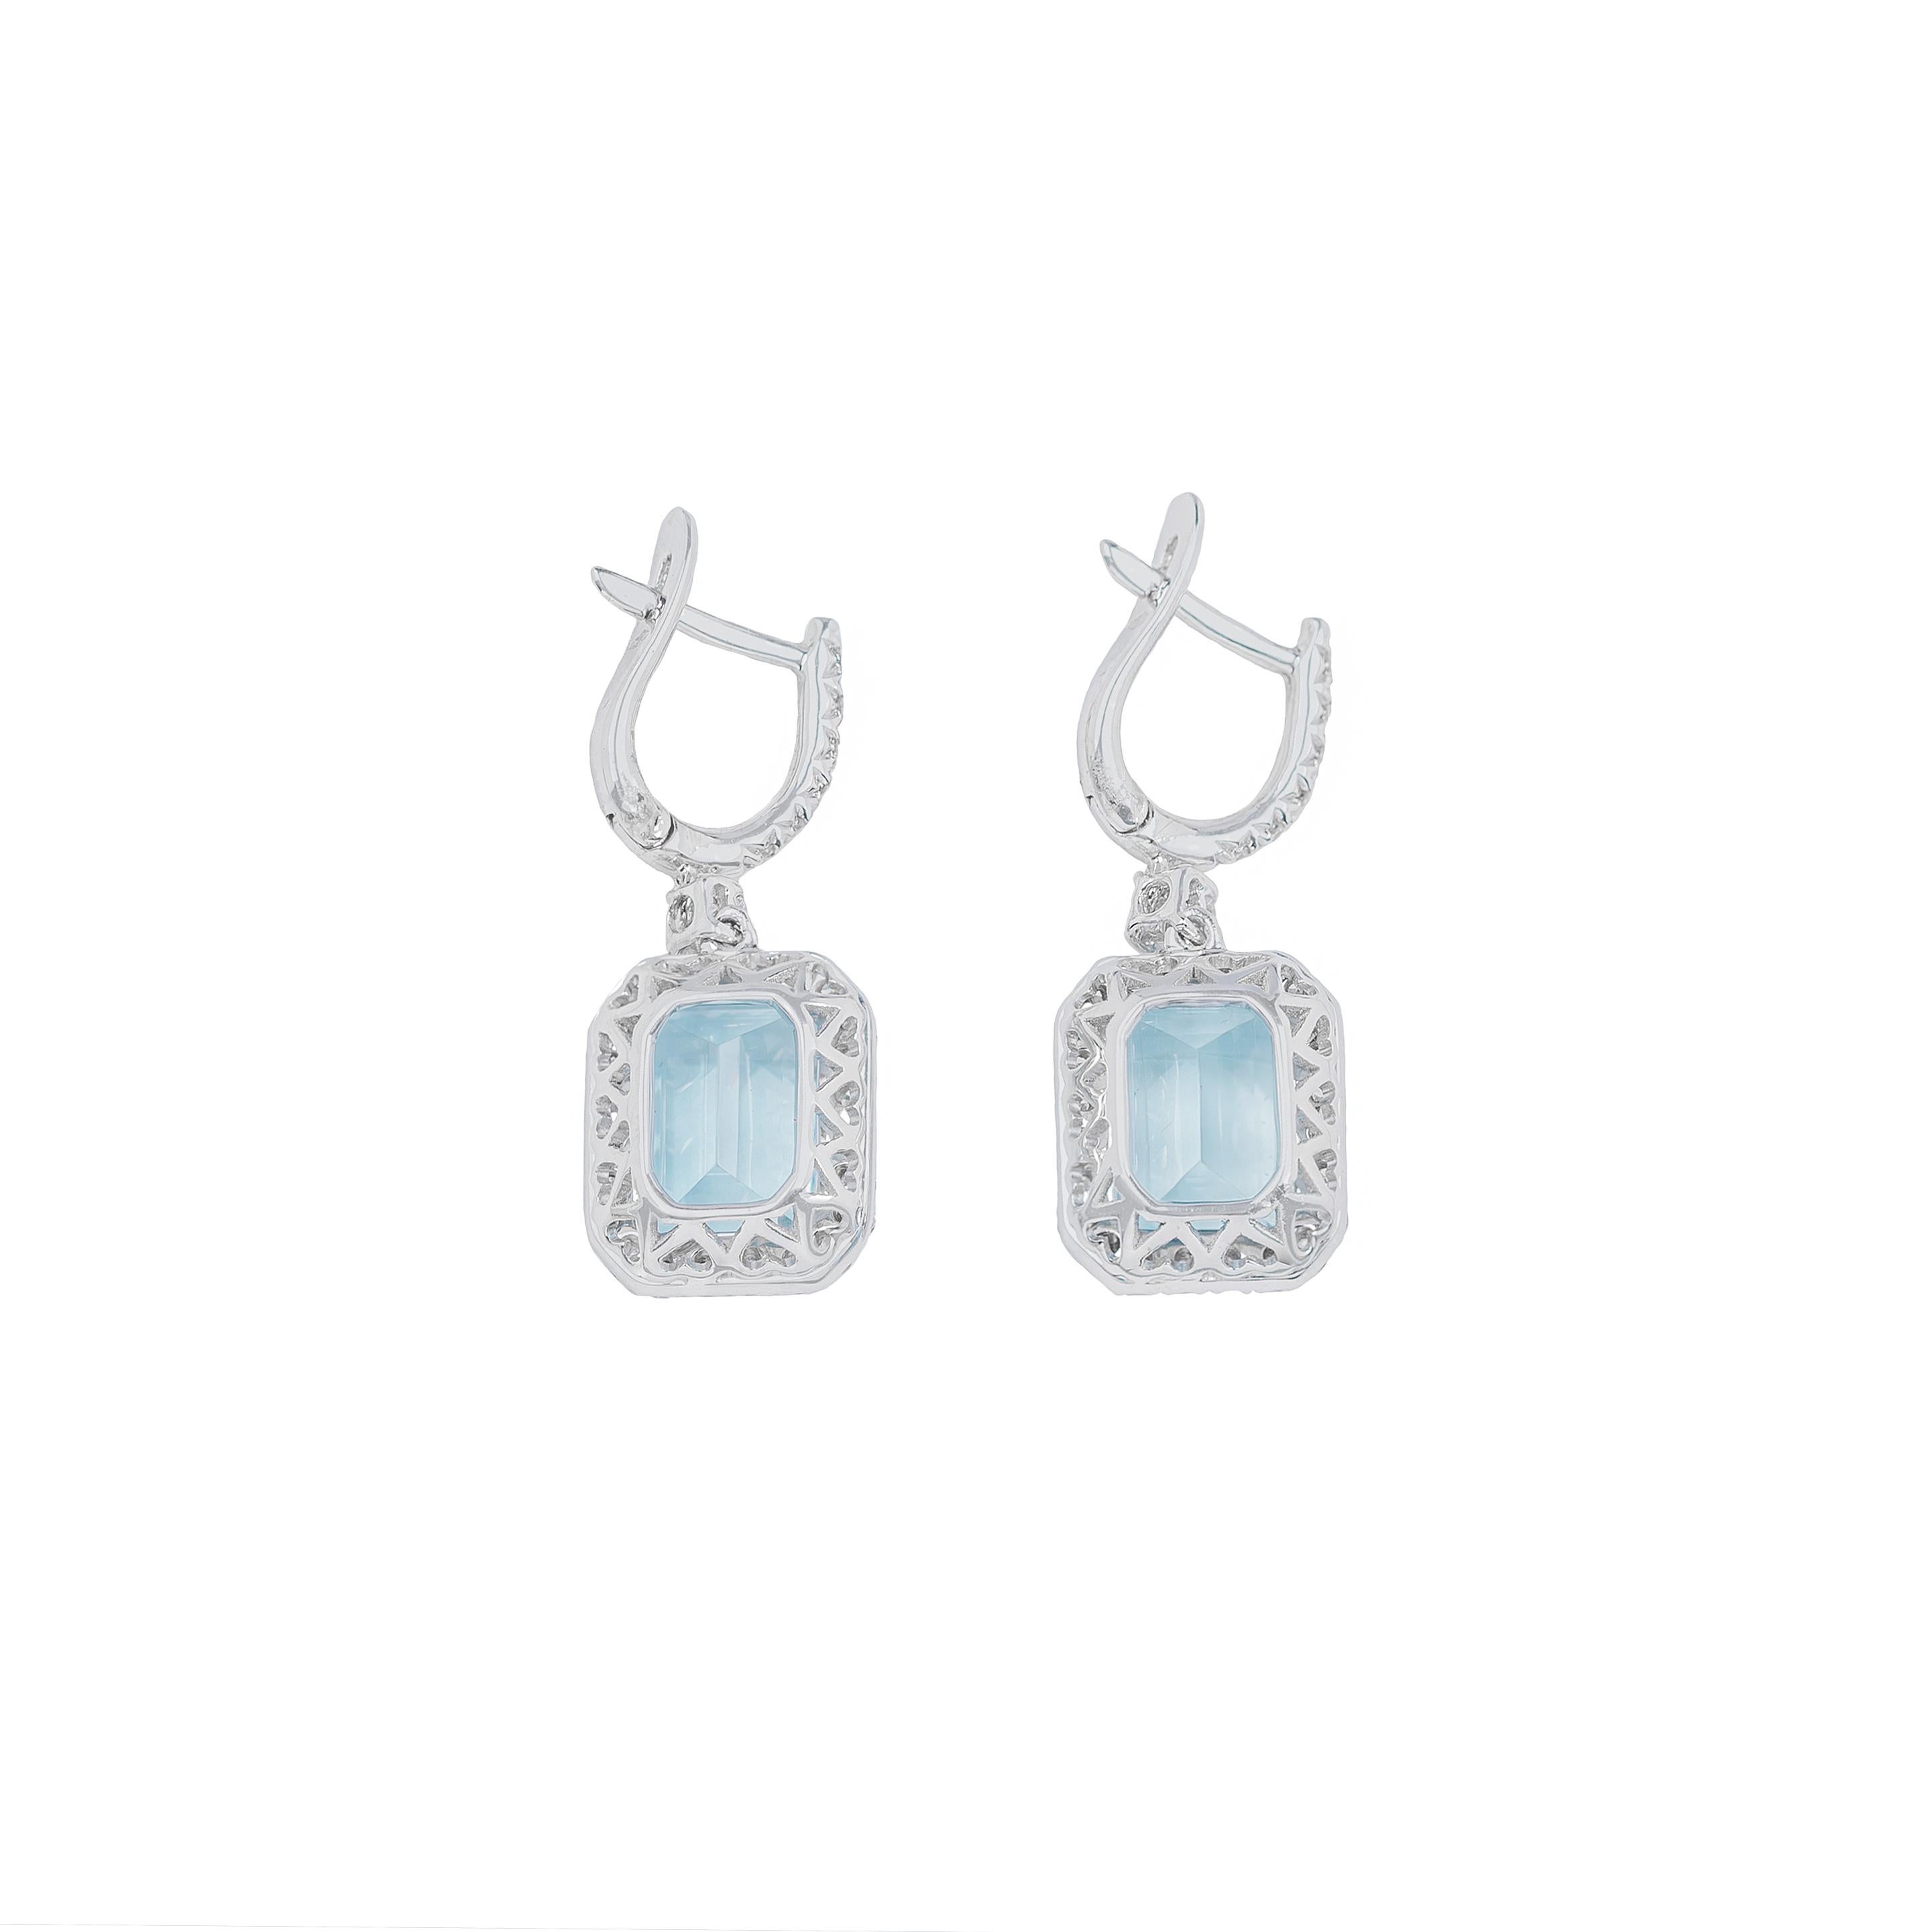 These earrings with aquamarine and diamonds are made in Italy by Crivelli.
Each earring features a pendant, made of an octagonal cut aquamarine surrounded by a row of brilliant cut diamonds, topped by a brilliant cut and a row of diamonds set in the